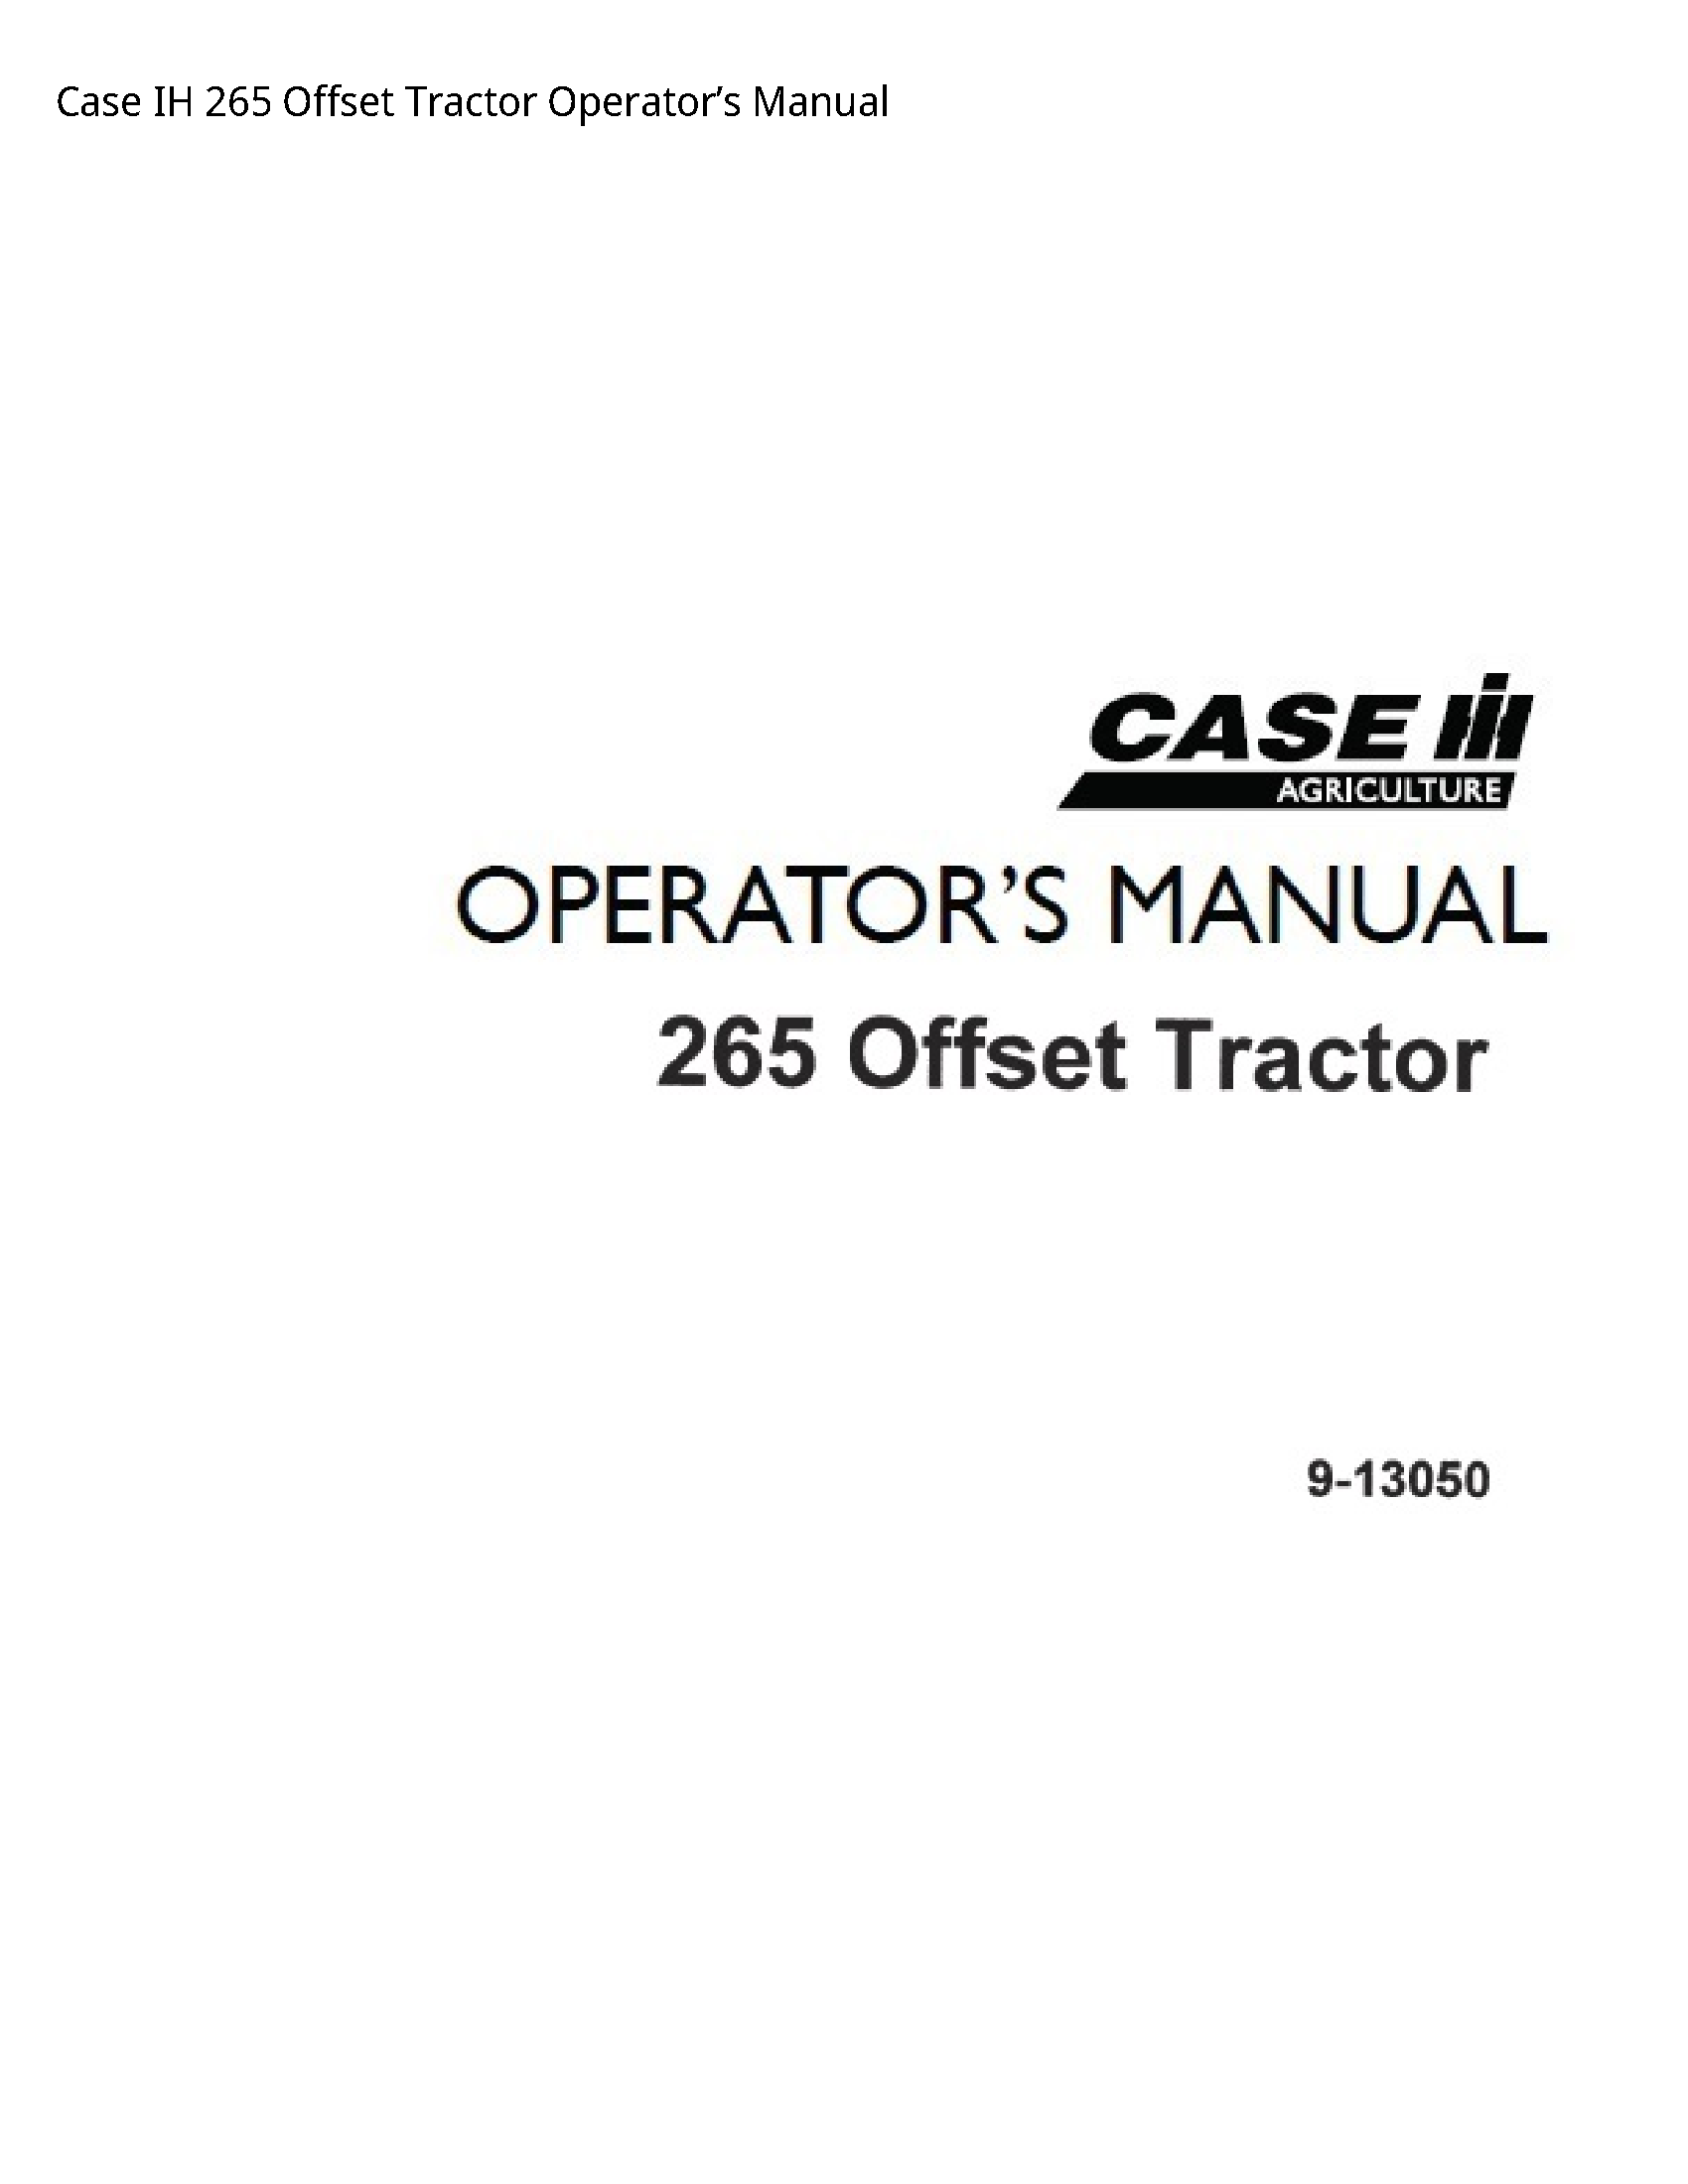 Case/Case IH 265 IH Offset Tractor Operator’s manual